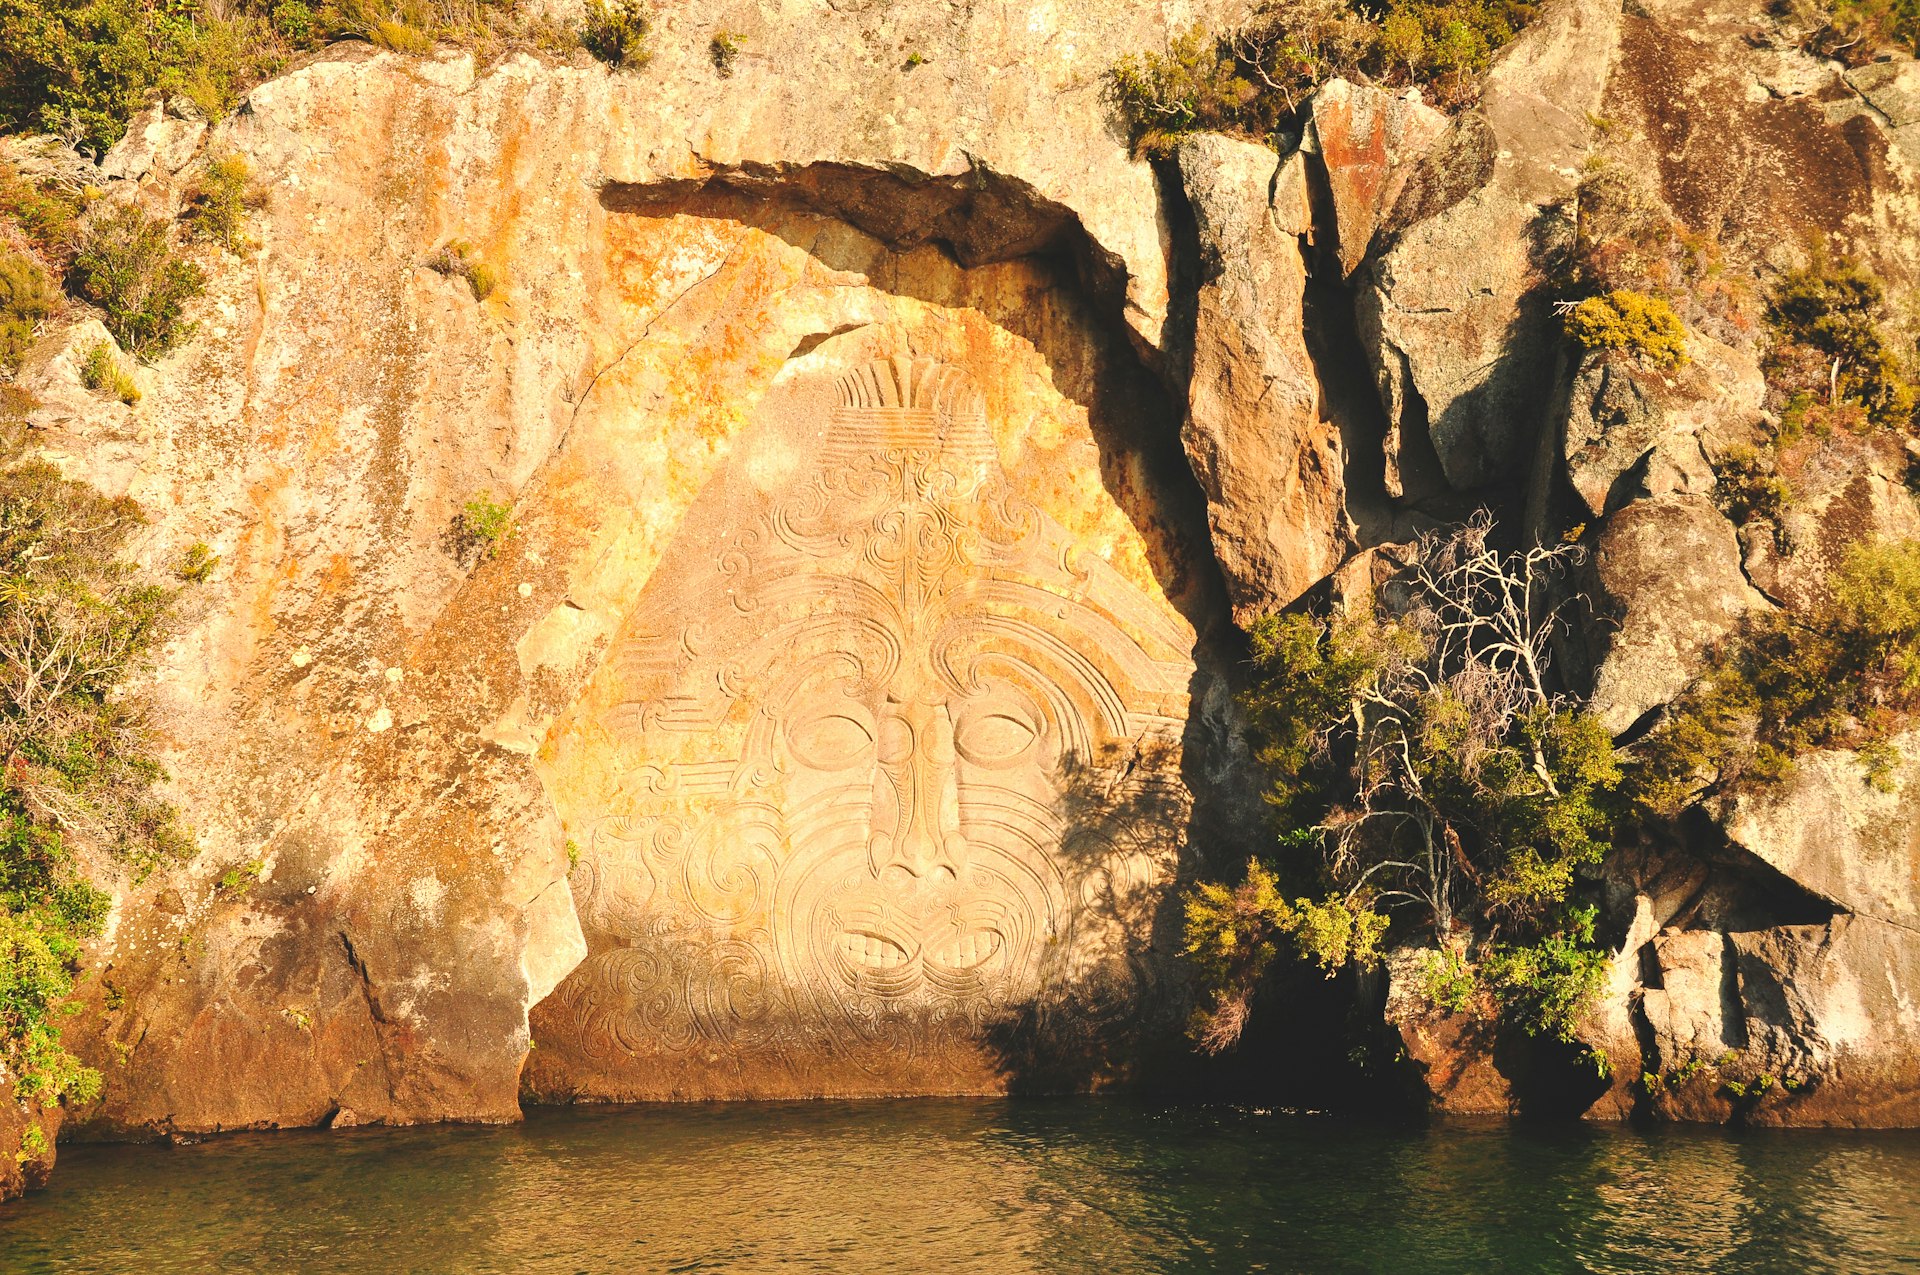 4m-high Māori carvings in a rock face in Lake Taupo